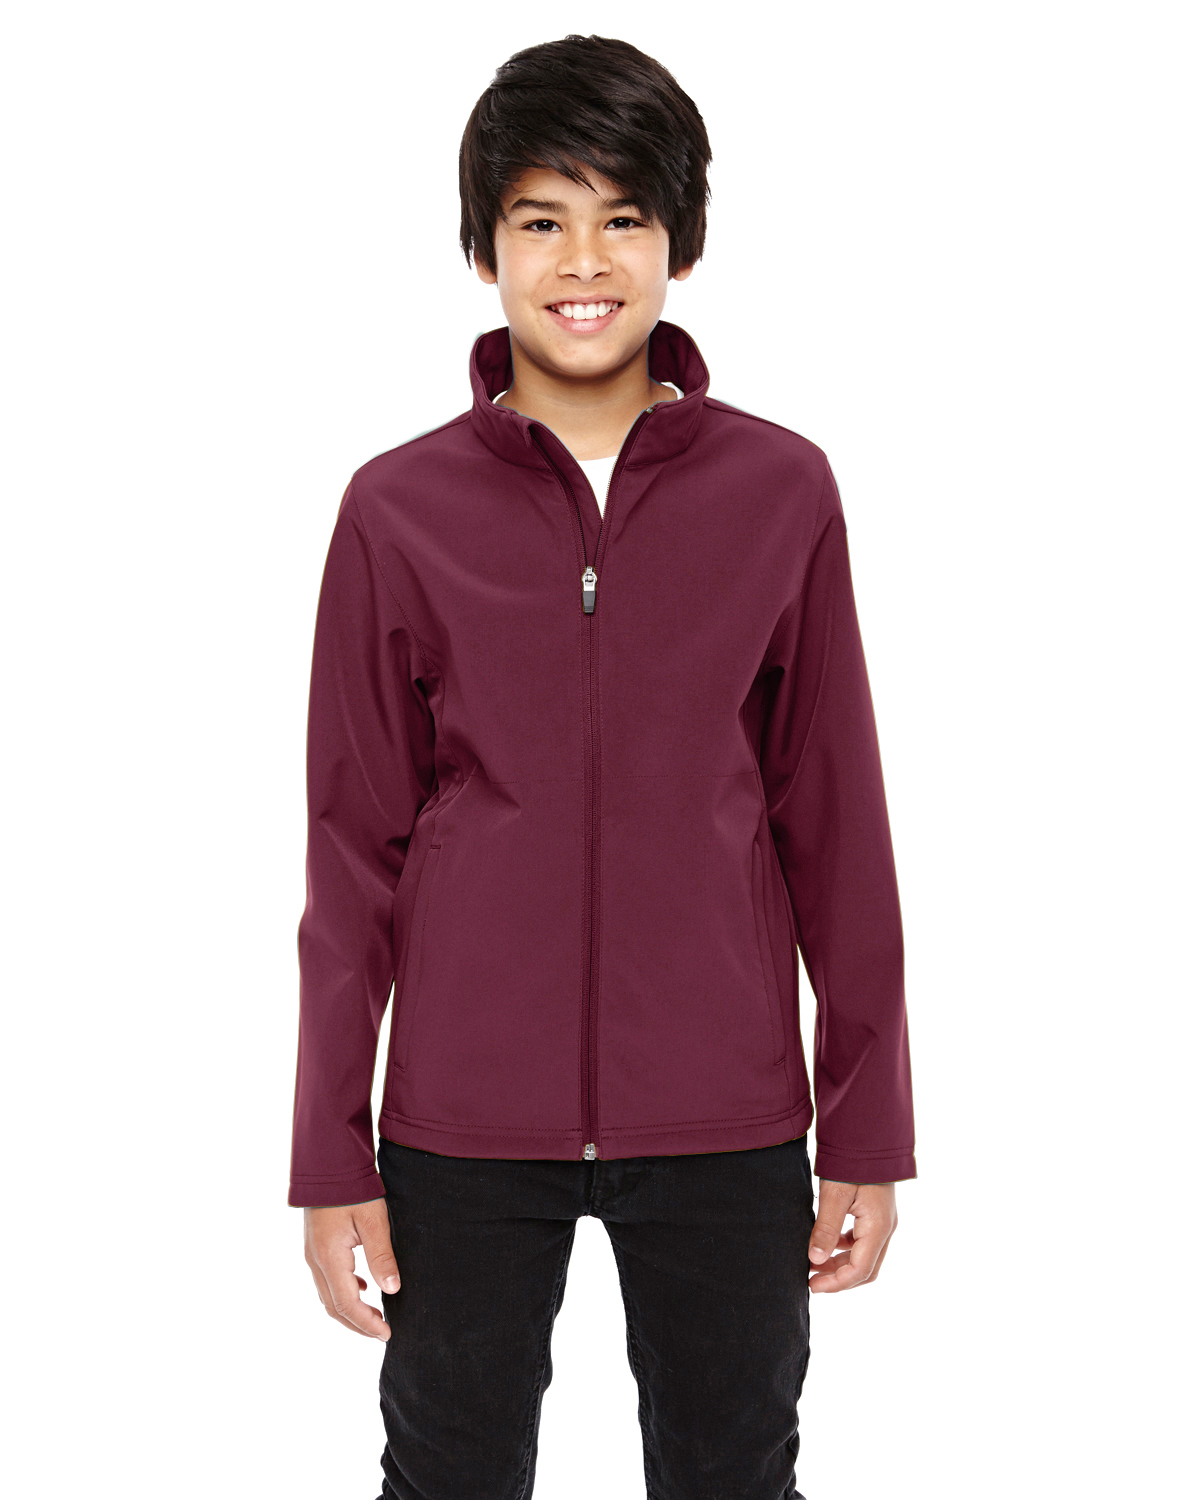 russell athletic softshell jacket